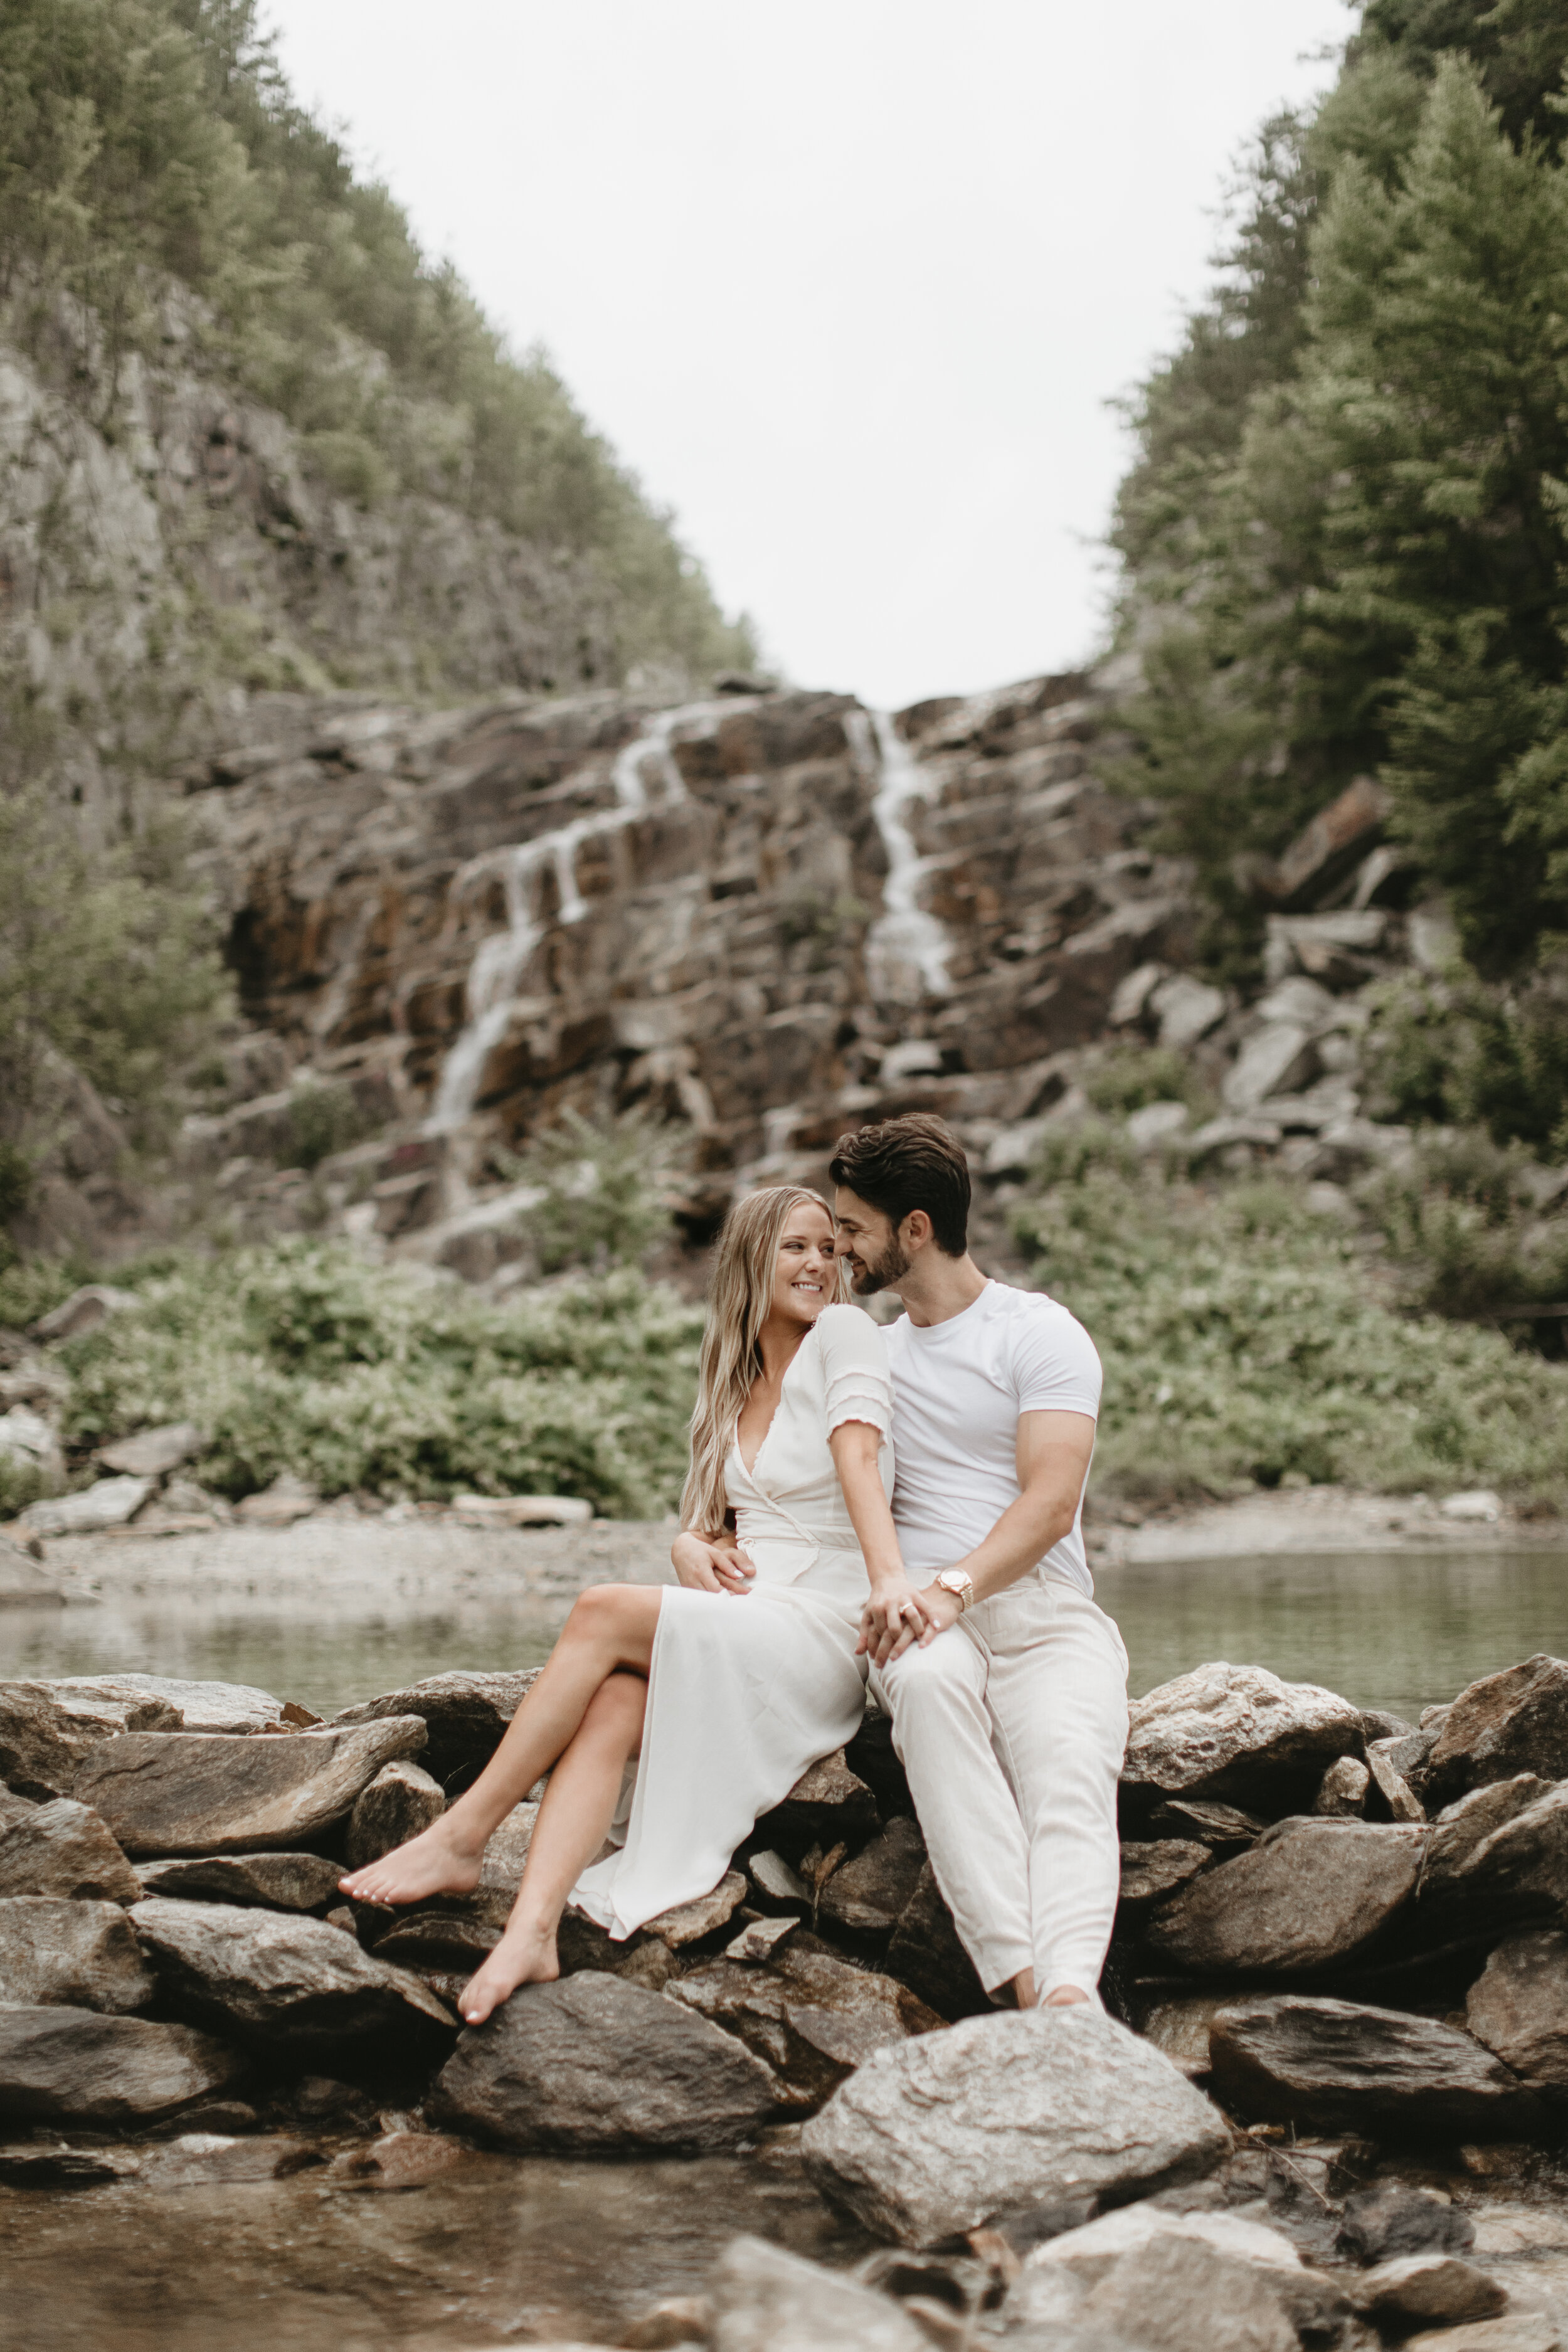 Nicole-Daacke-Photography-michaux-state-forest-elopement-adventure-engagement-session-pennsylvania-elopement-pa-elopement-photographer-gettysburg-photographer-state-park-elopement-engagement-session-pennsylvania-waterfall-167.jpg